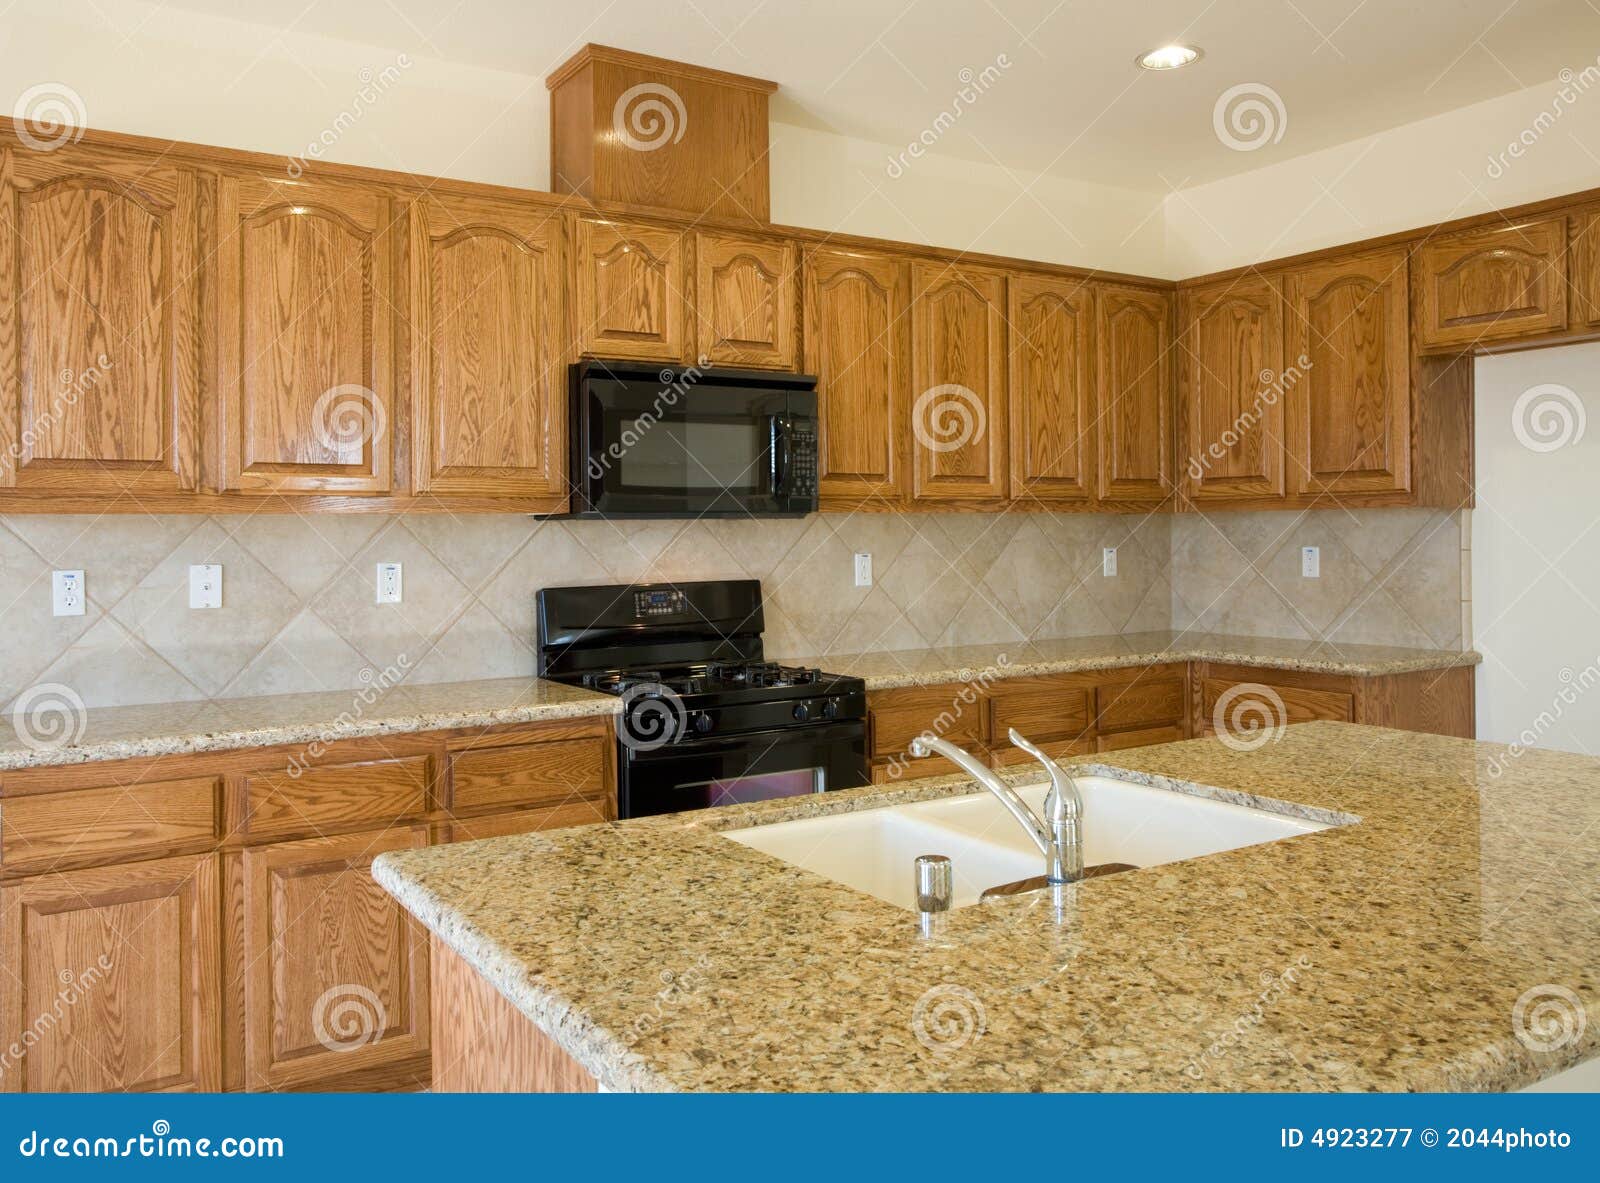 New Or Remodel Residential Kitchen Stock Image Image Of